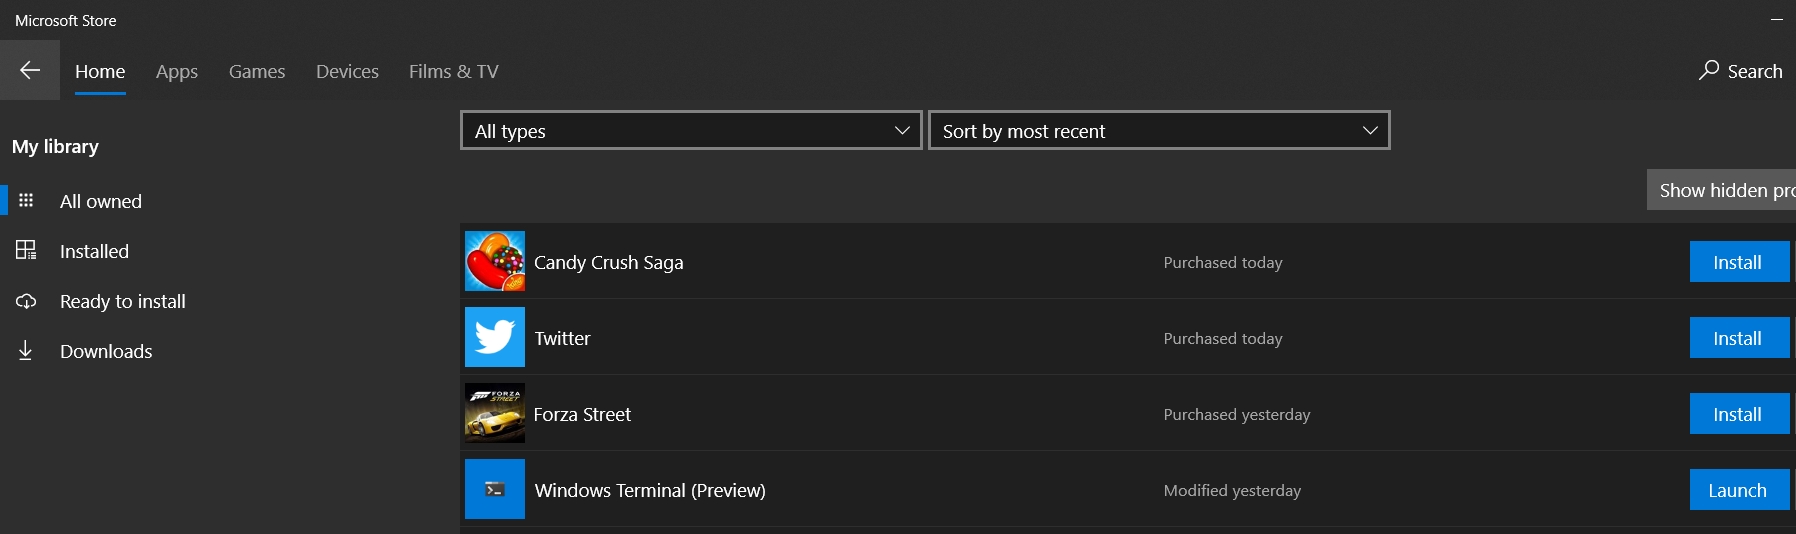 Microsoft Store purchased apps by itself 457d3e75-3a15-49c3-ae30-0b4b380225c1?upload=true.jpg